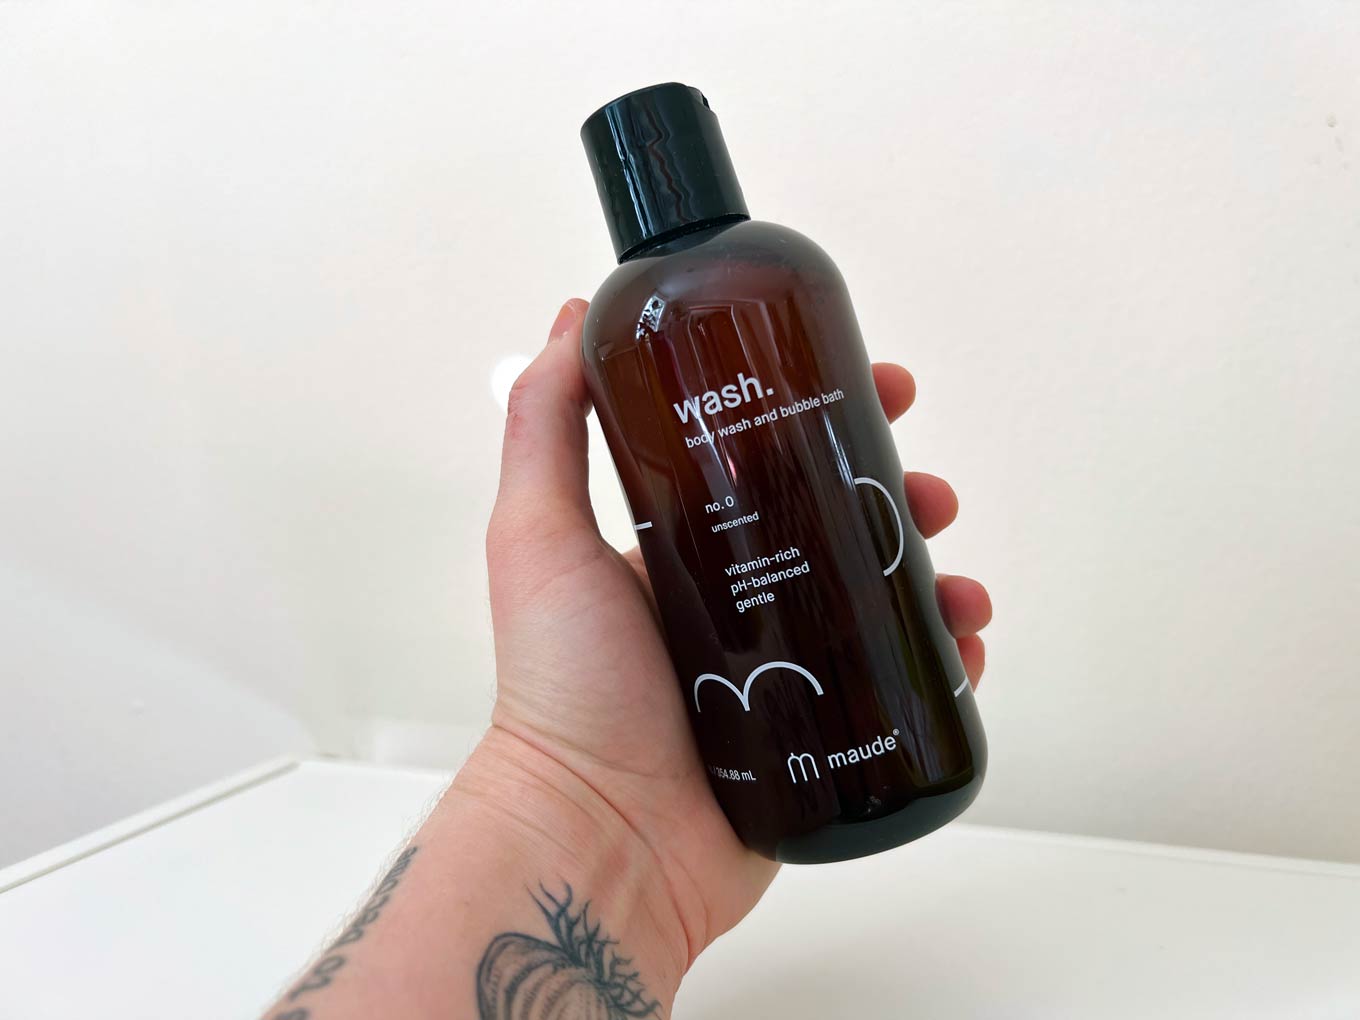 A hand holds up a bottle of Maude's body wash